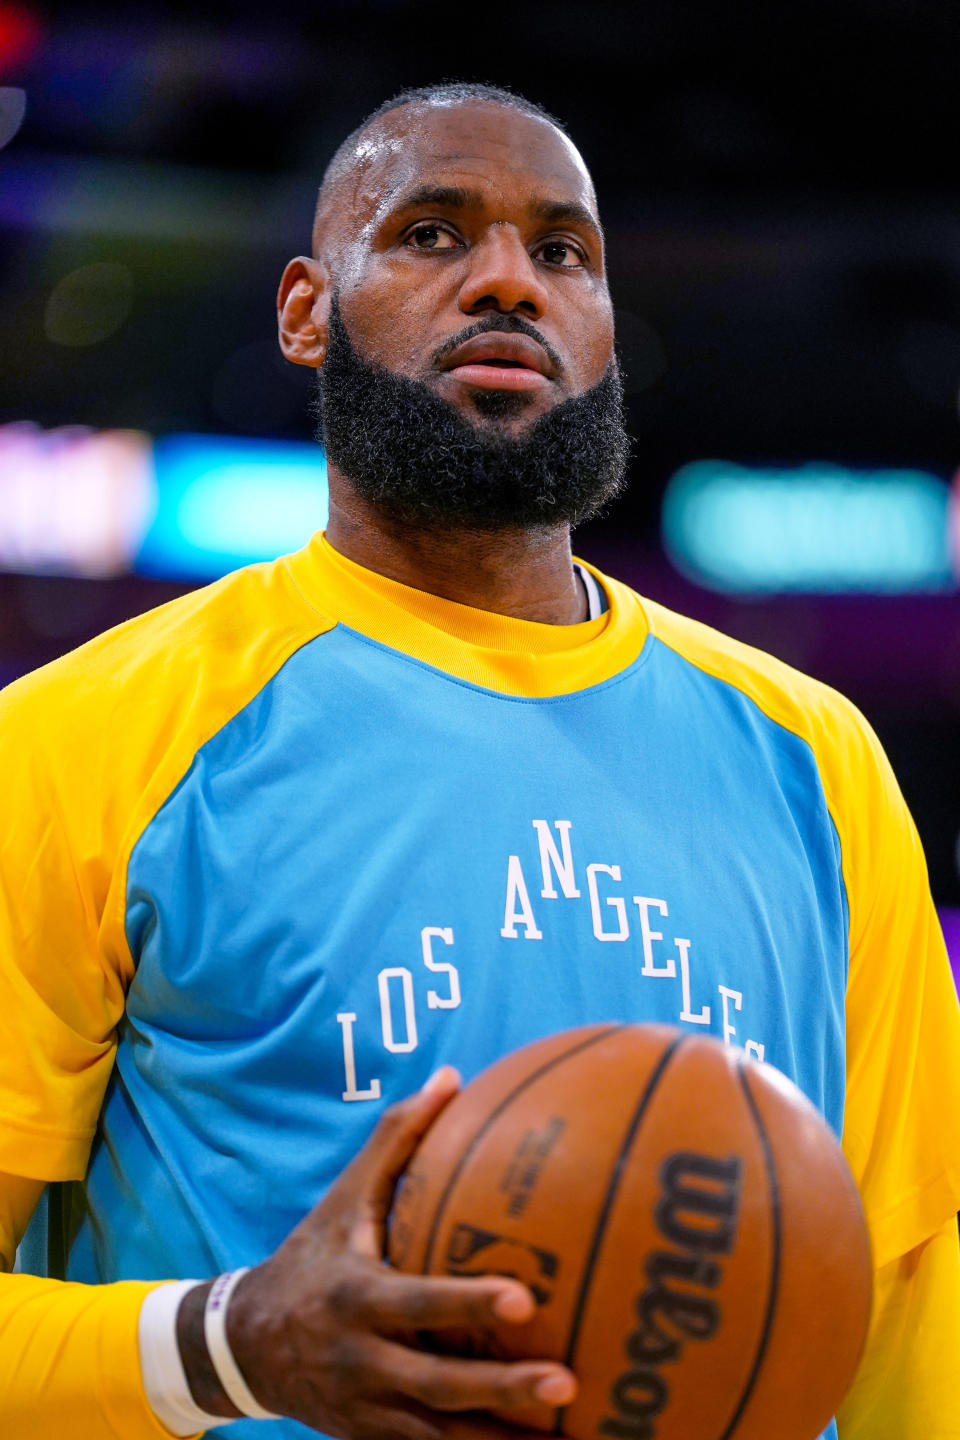 LeBron James is pictured in his Los Angeles Lakers gear as he&#xa0;prepares for a game against the New Orleans Pelicans on April 1, 2022